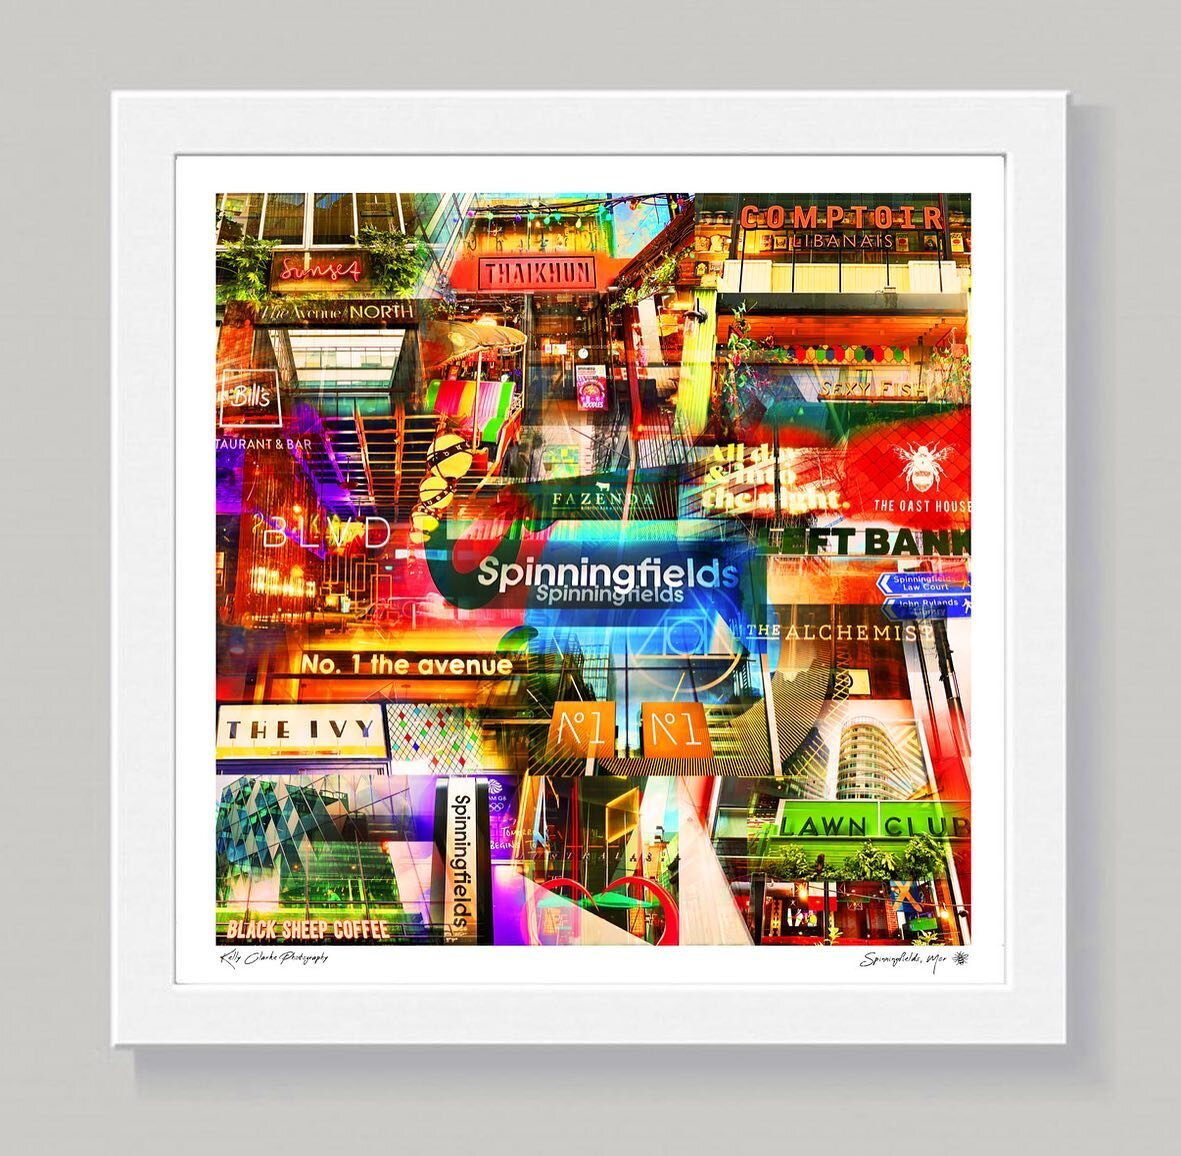 A new Manchester design to add to your collections! On the website now from just &pound;10 🙌
#manchesterspinningfields #spinningfields #mcrprint #manchester #manchesterart #manchesterframedprint #manc #themanc #manchestersmallbusiness #manchestergif